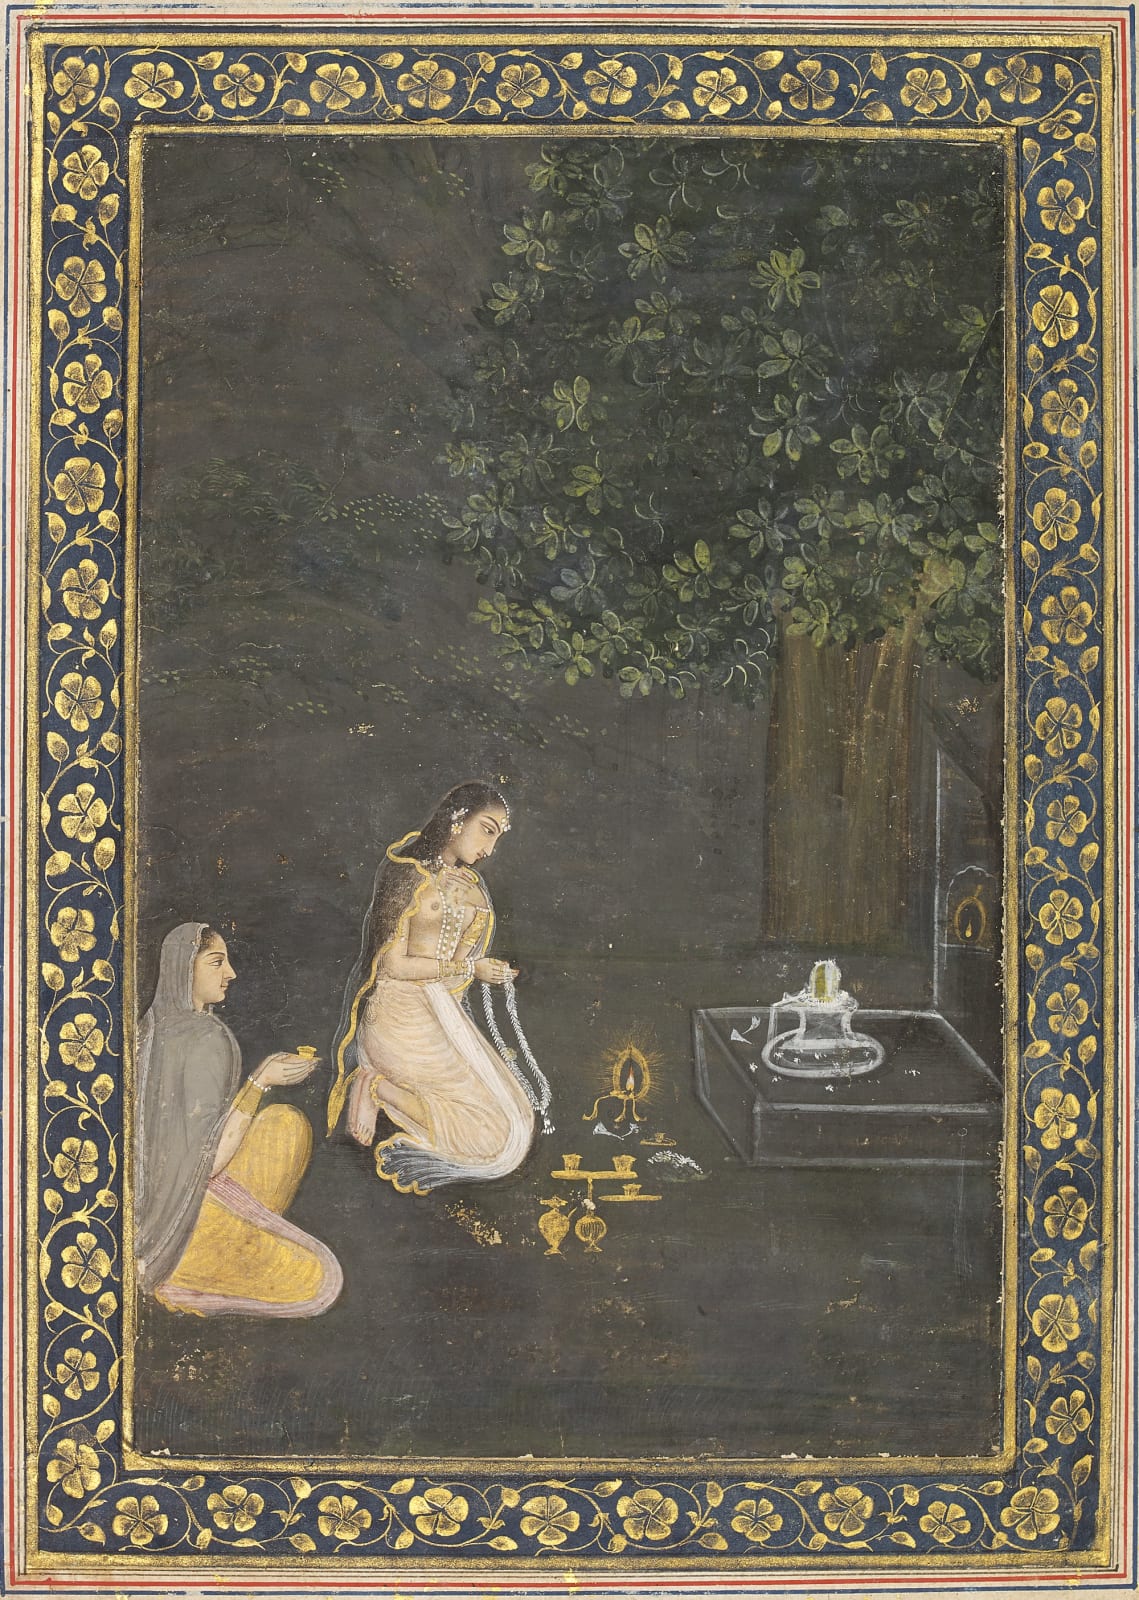 A stylized multi-stemmed Iris, Verso: A Lady Worshipping a Sivalingam by Night, Avadh, c. 1760